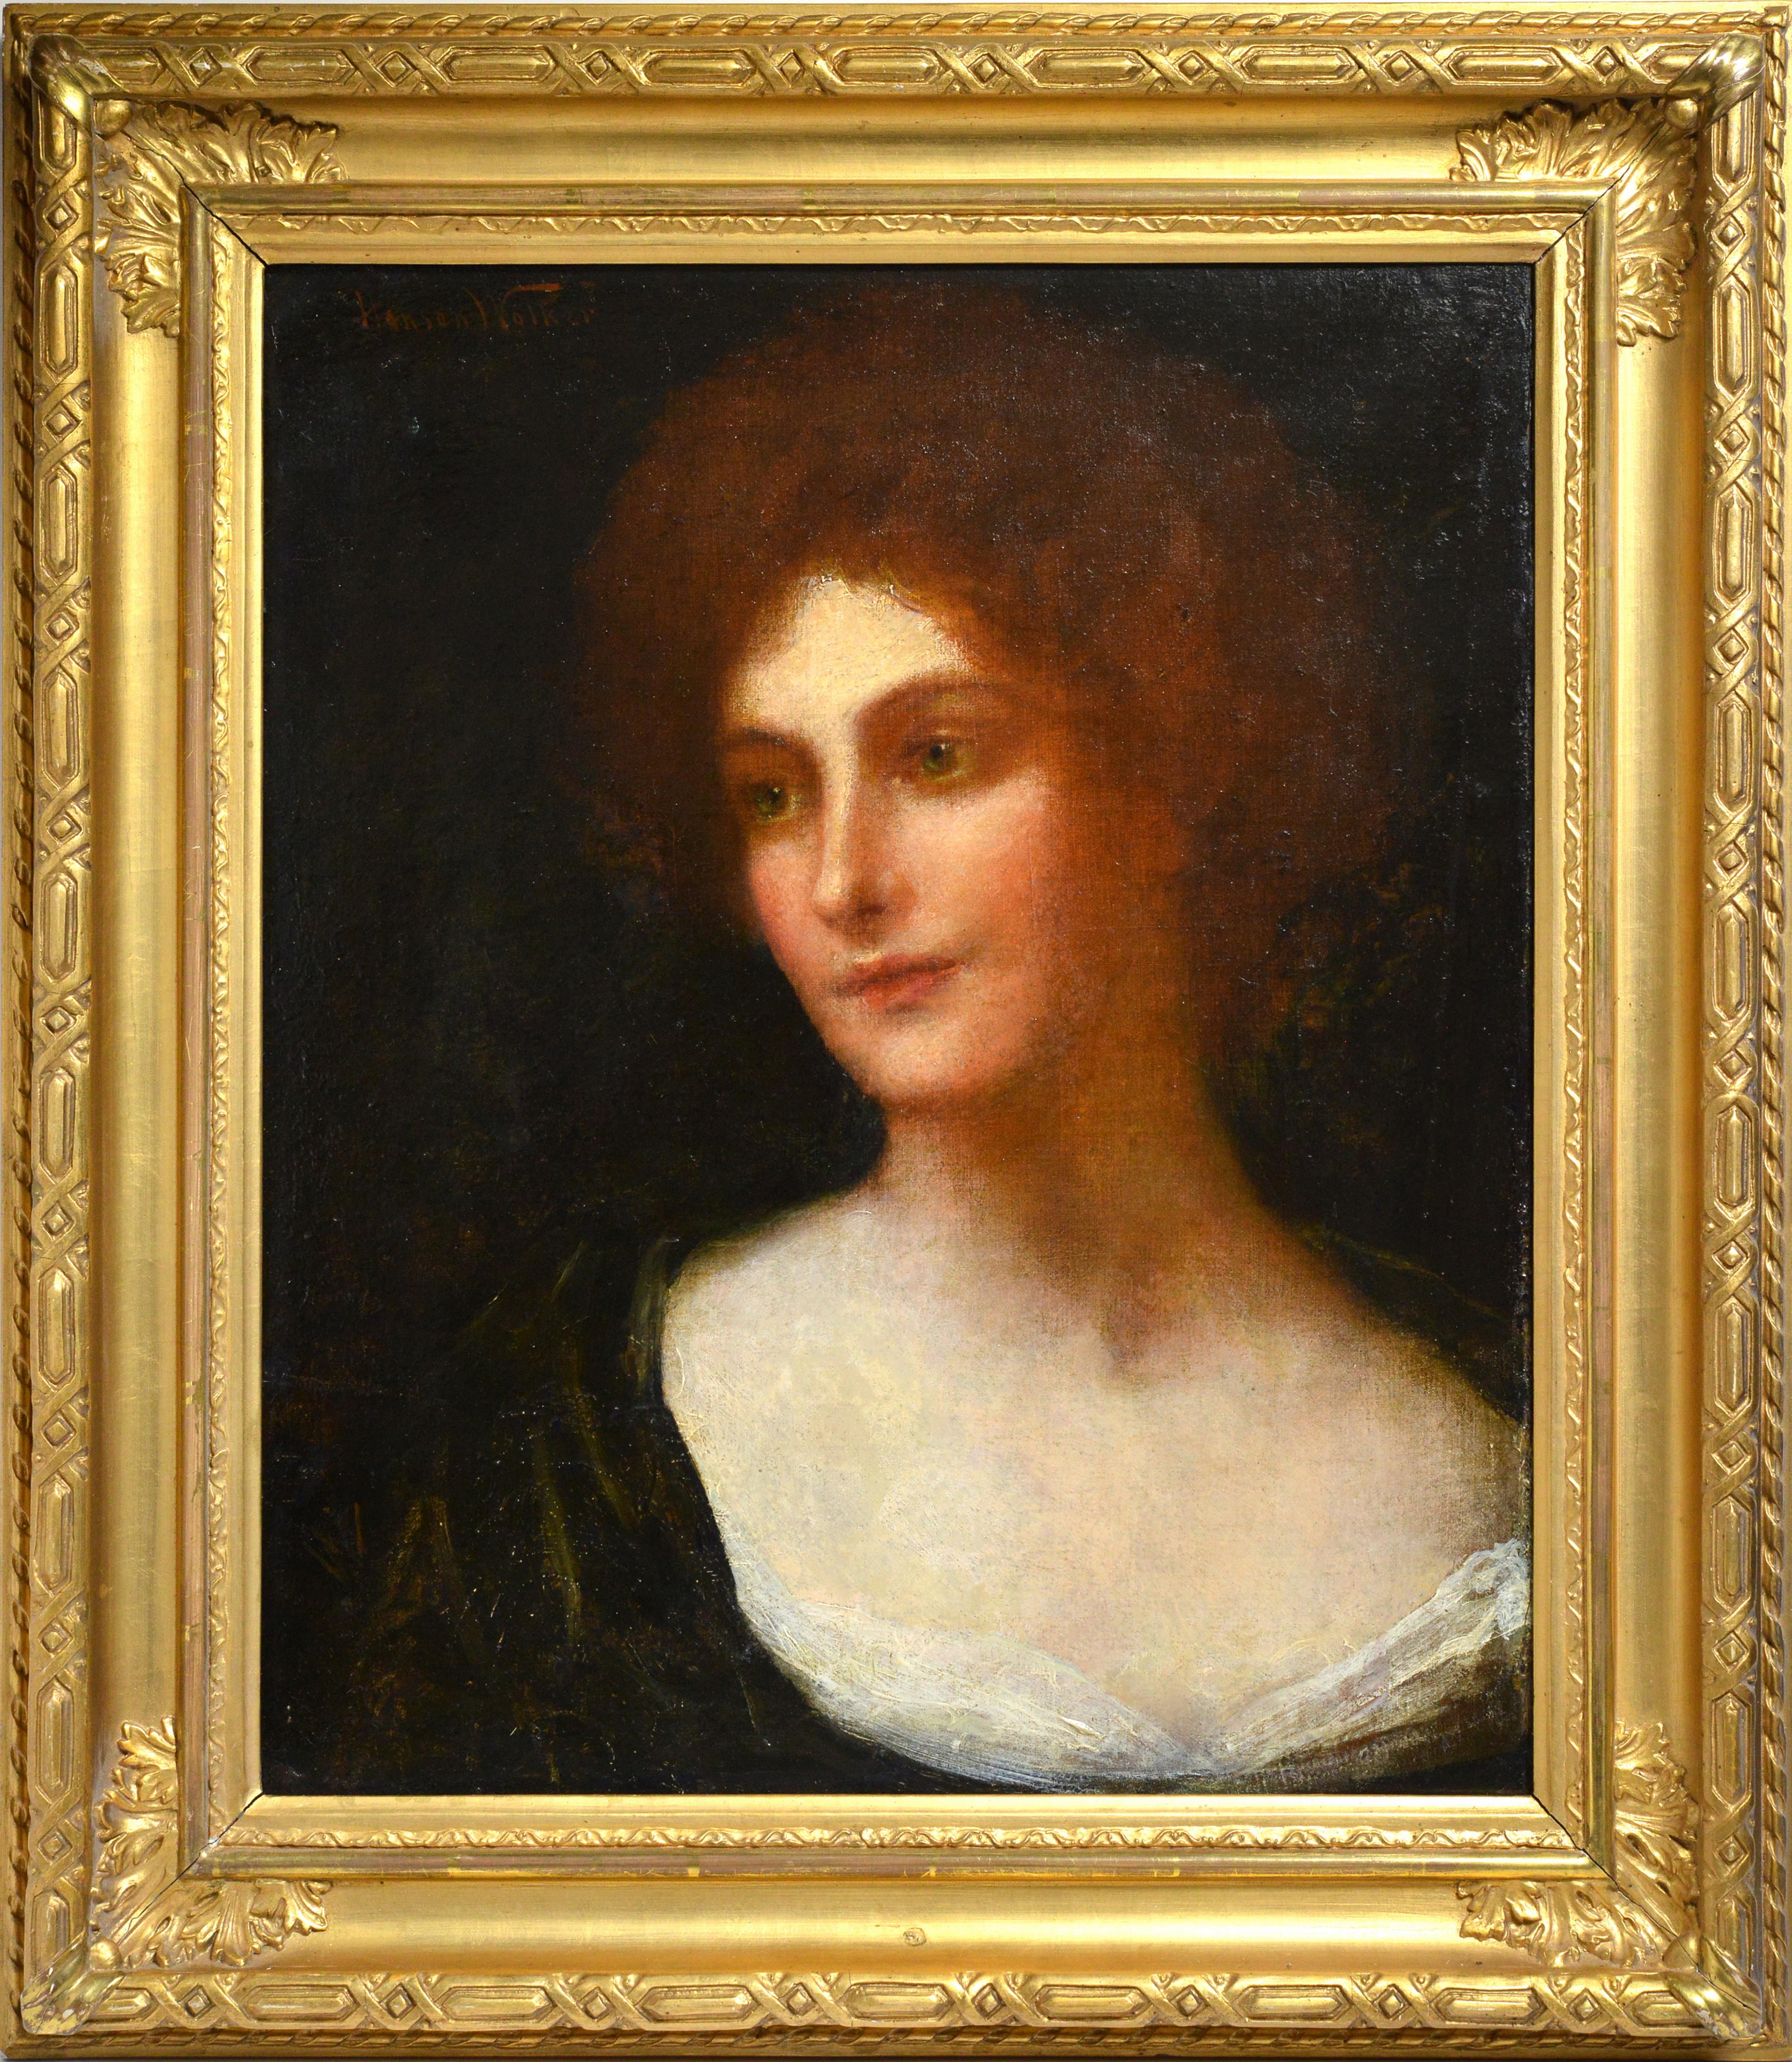 John Hanson Walker Portrait Painting - Portrait of Redhaired Lady with Emerald Eyes 19th century British Oil Painting